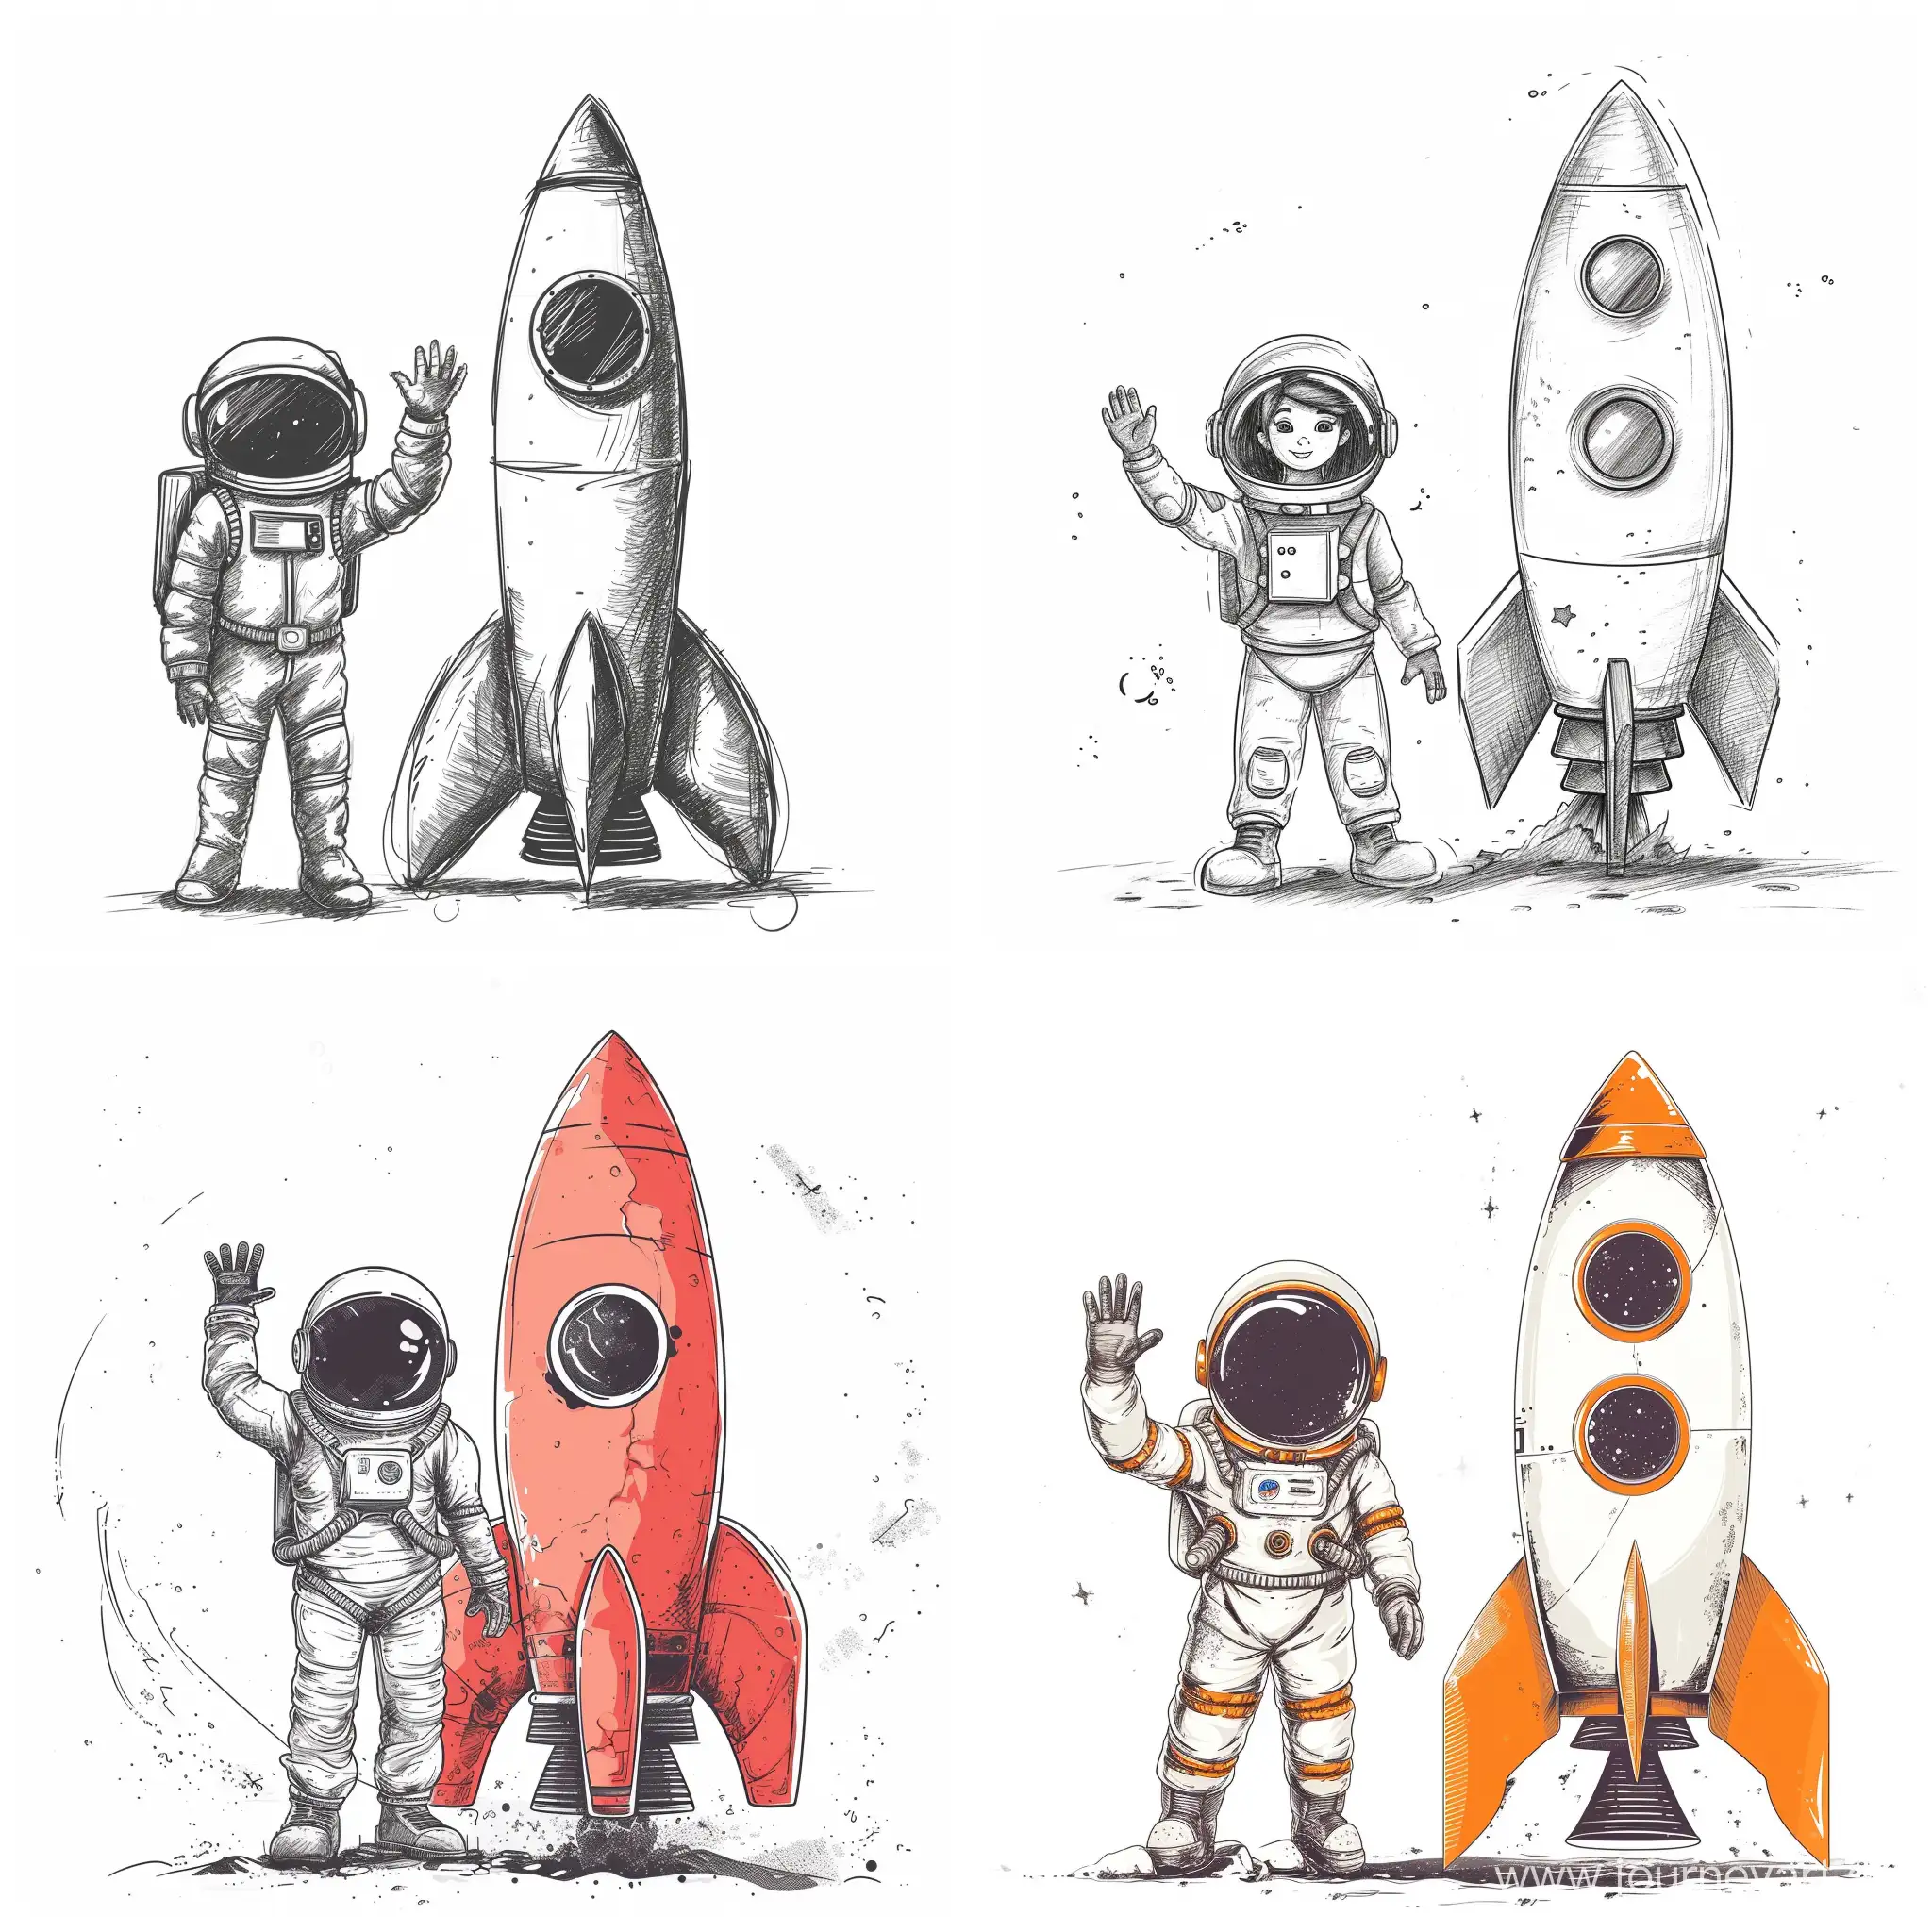 Young-Astronaut-Invites-You-to-Space-Adventure-Victor-Sketch-Illustration